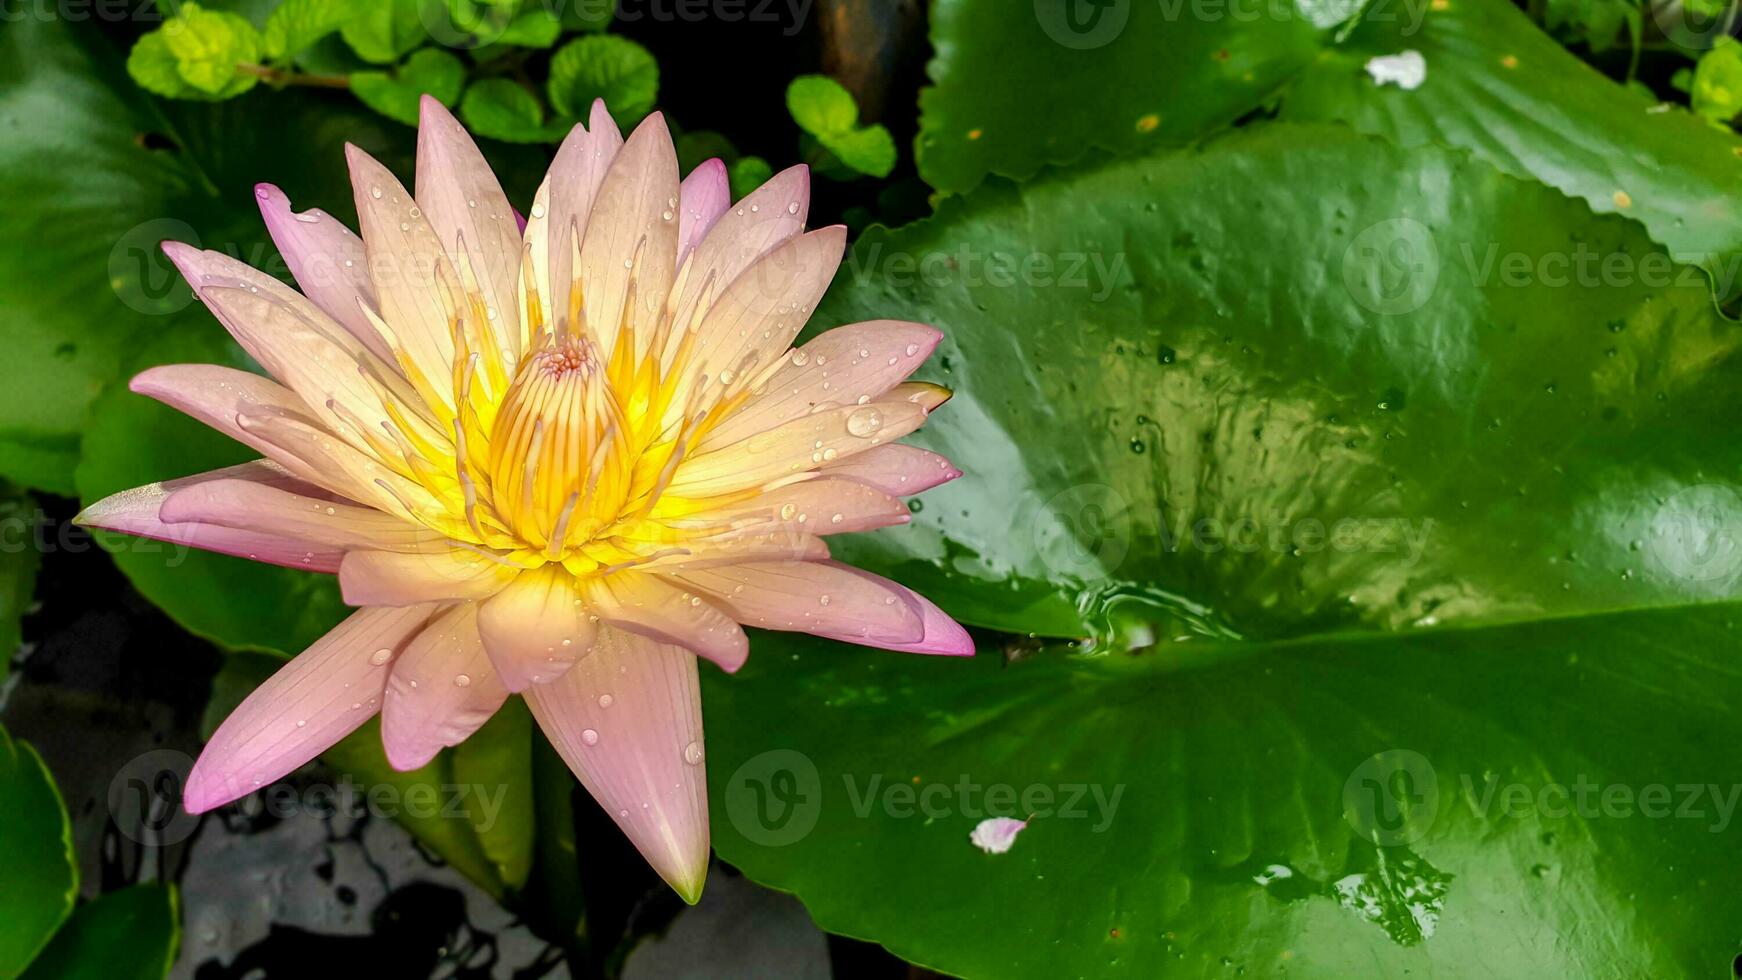 Closeup a beautiful pink lotus flower blooming in a garden with water droplets on blurred lotus leaf background. photo